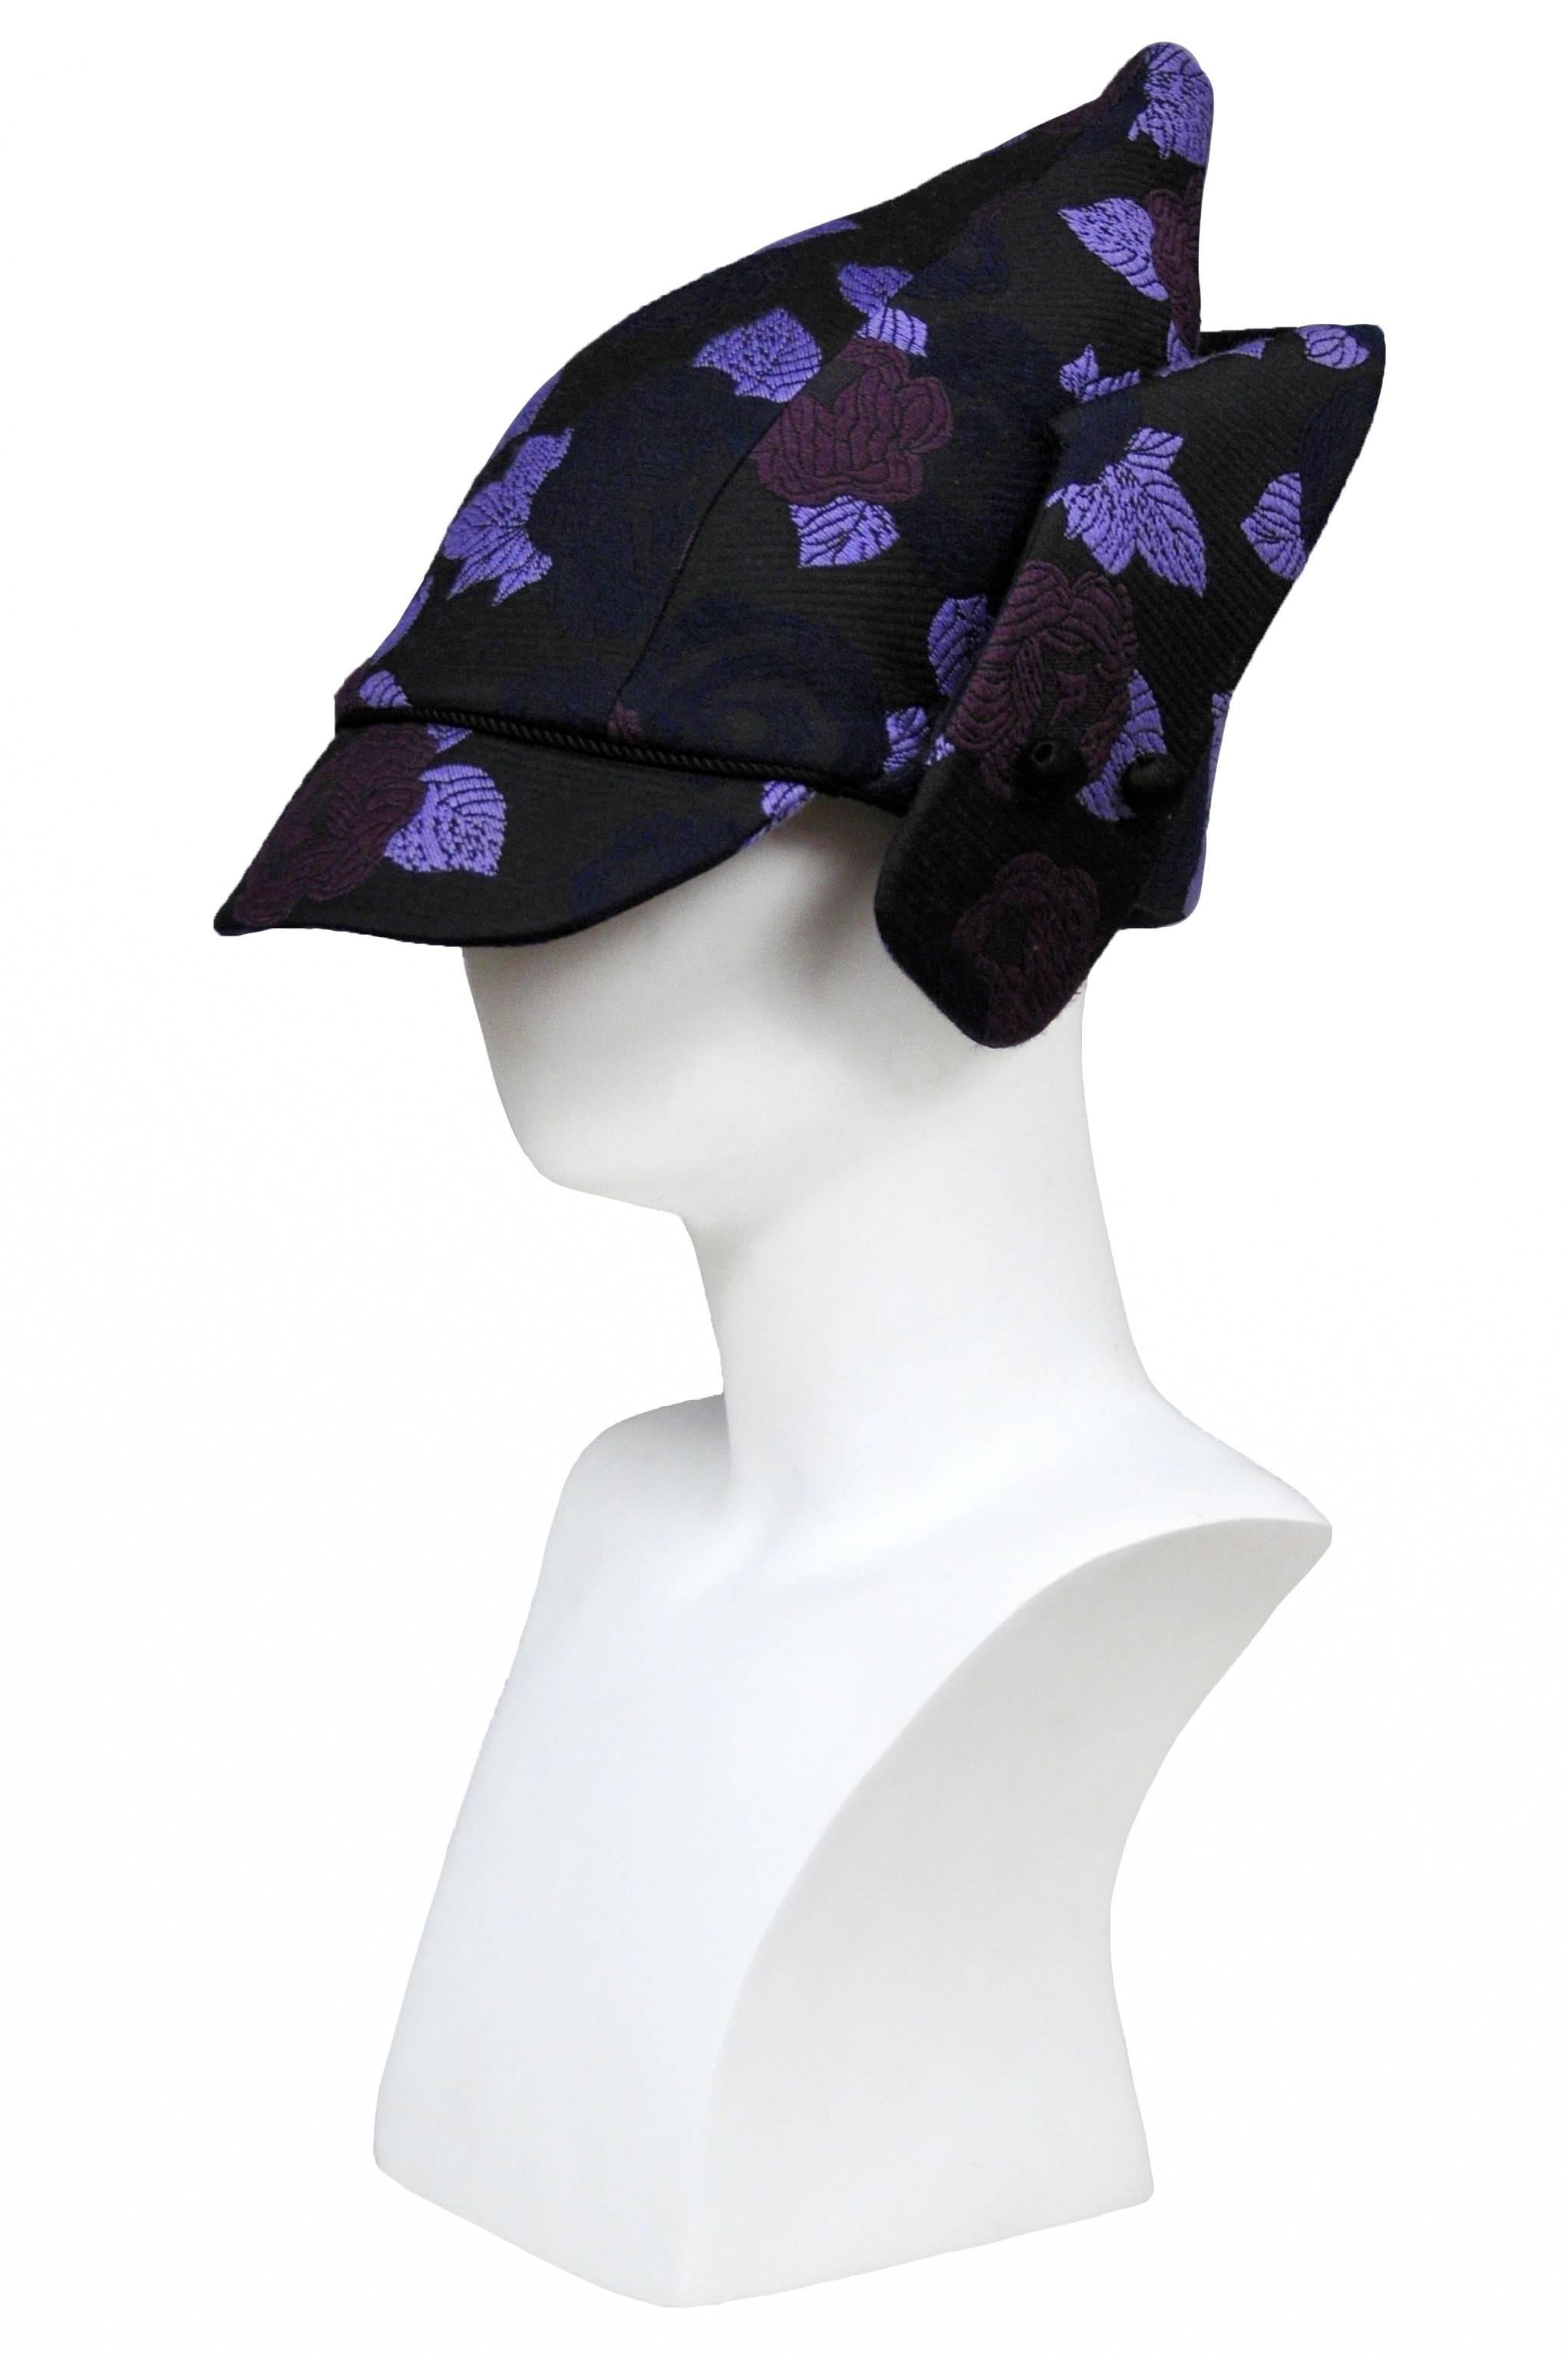 Vintage John Galliano for Christian Dior black hat featuring a pointed top, front brim and purple floral embroidery throughout. From the Fall 2009 Runway Collection.